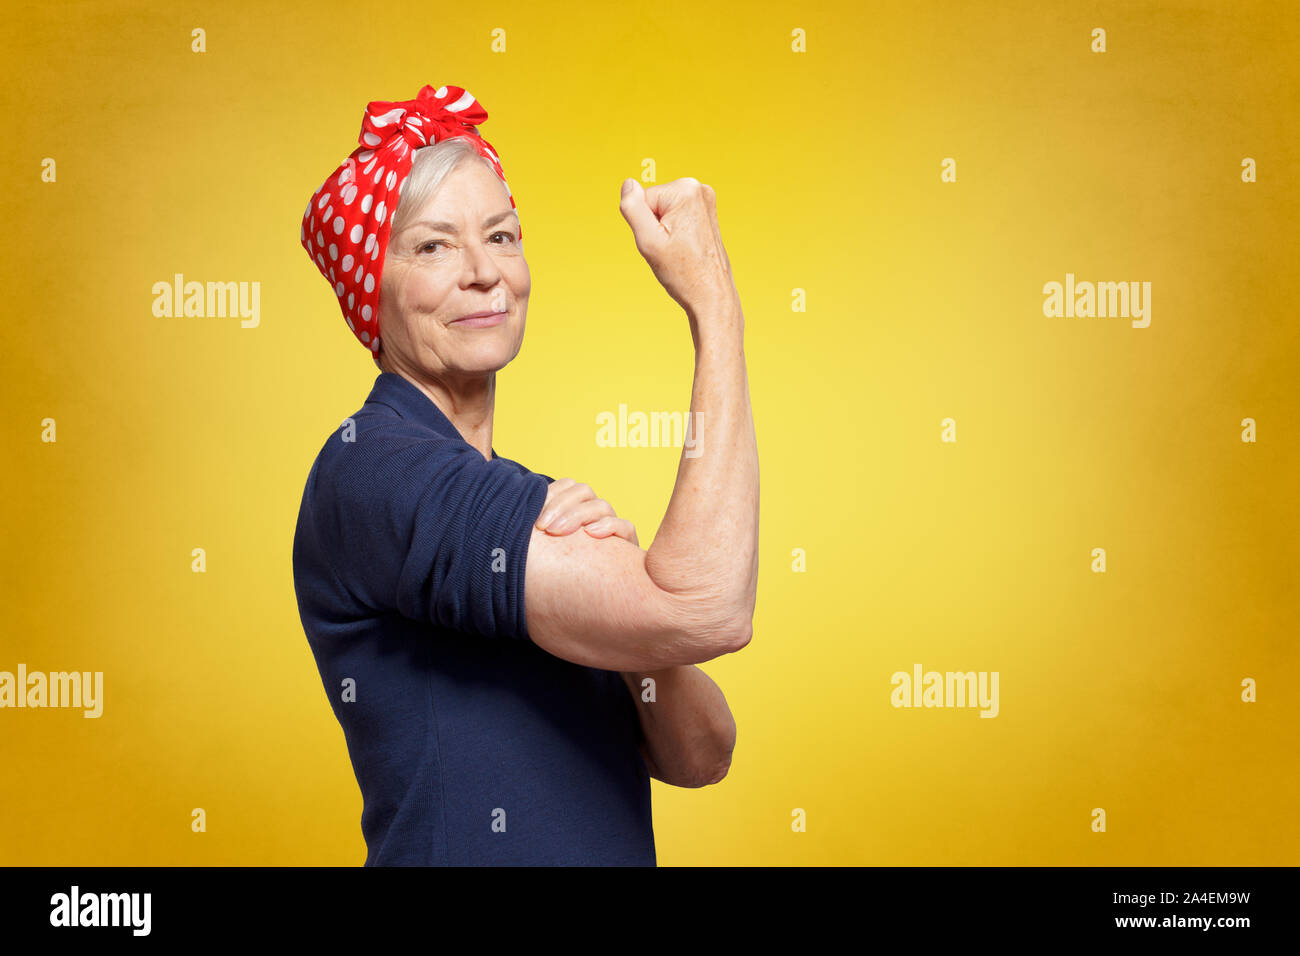 Rosie Riveter concept: proud elderly woman with red headscarf, flexing her muscles, copy space, yellow background Stock Photo